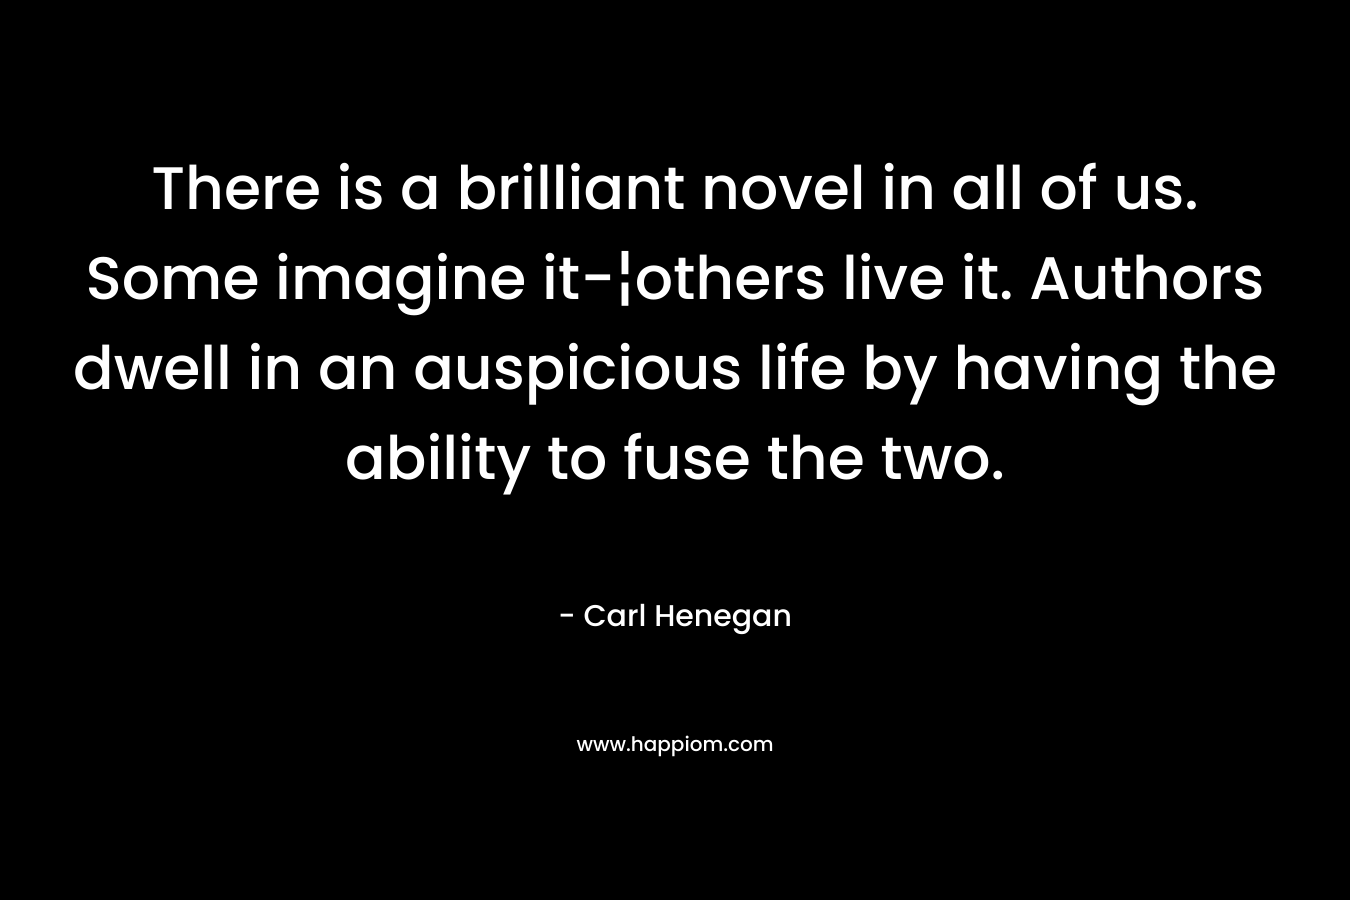 There is a brilliant novel in all of us. Some imagine it-¦others live it. Authors dwell in an auspicious life by having the ability to fuse the two.